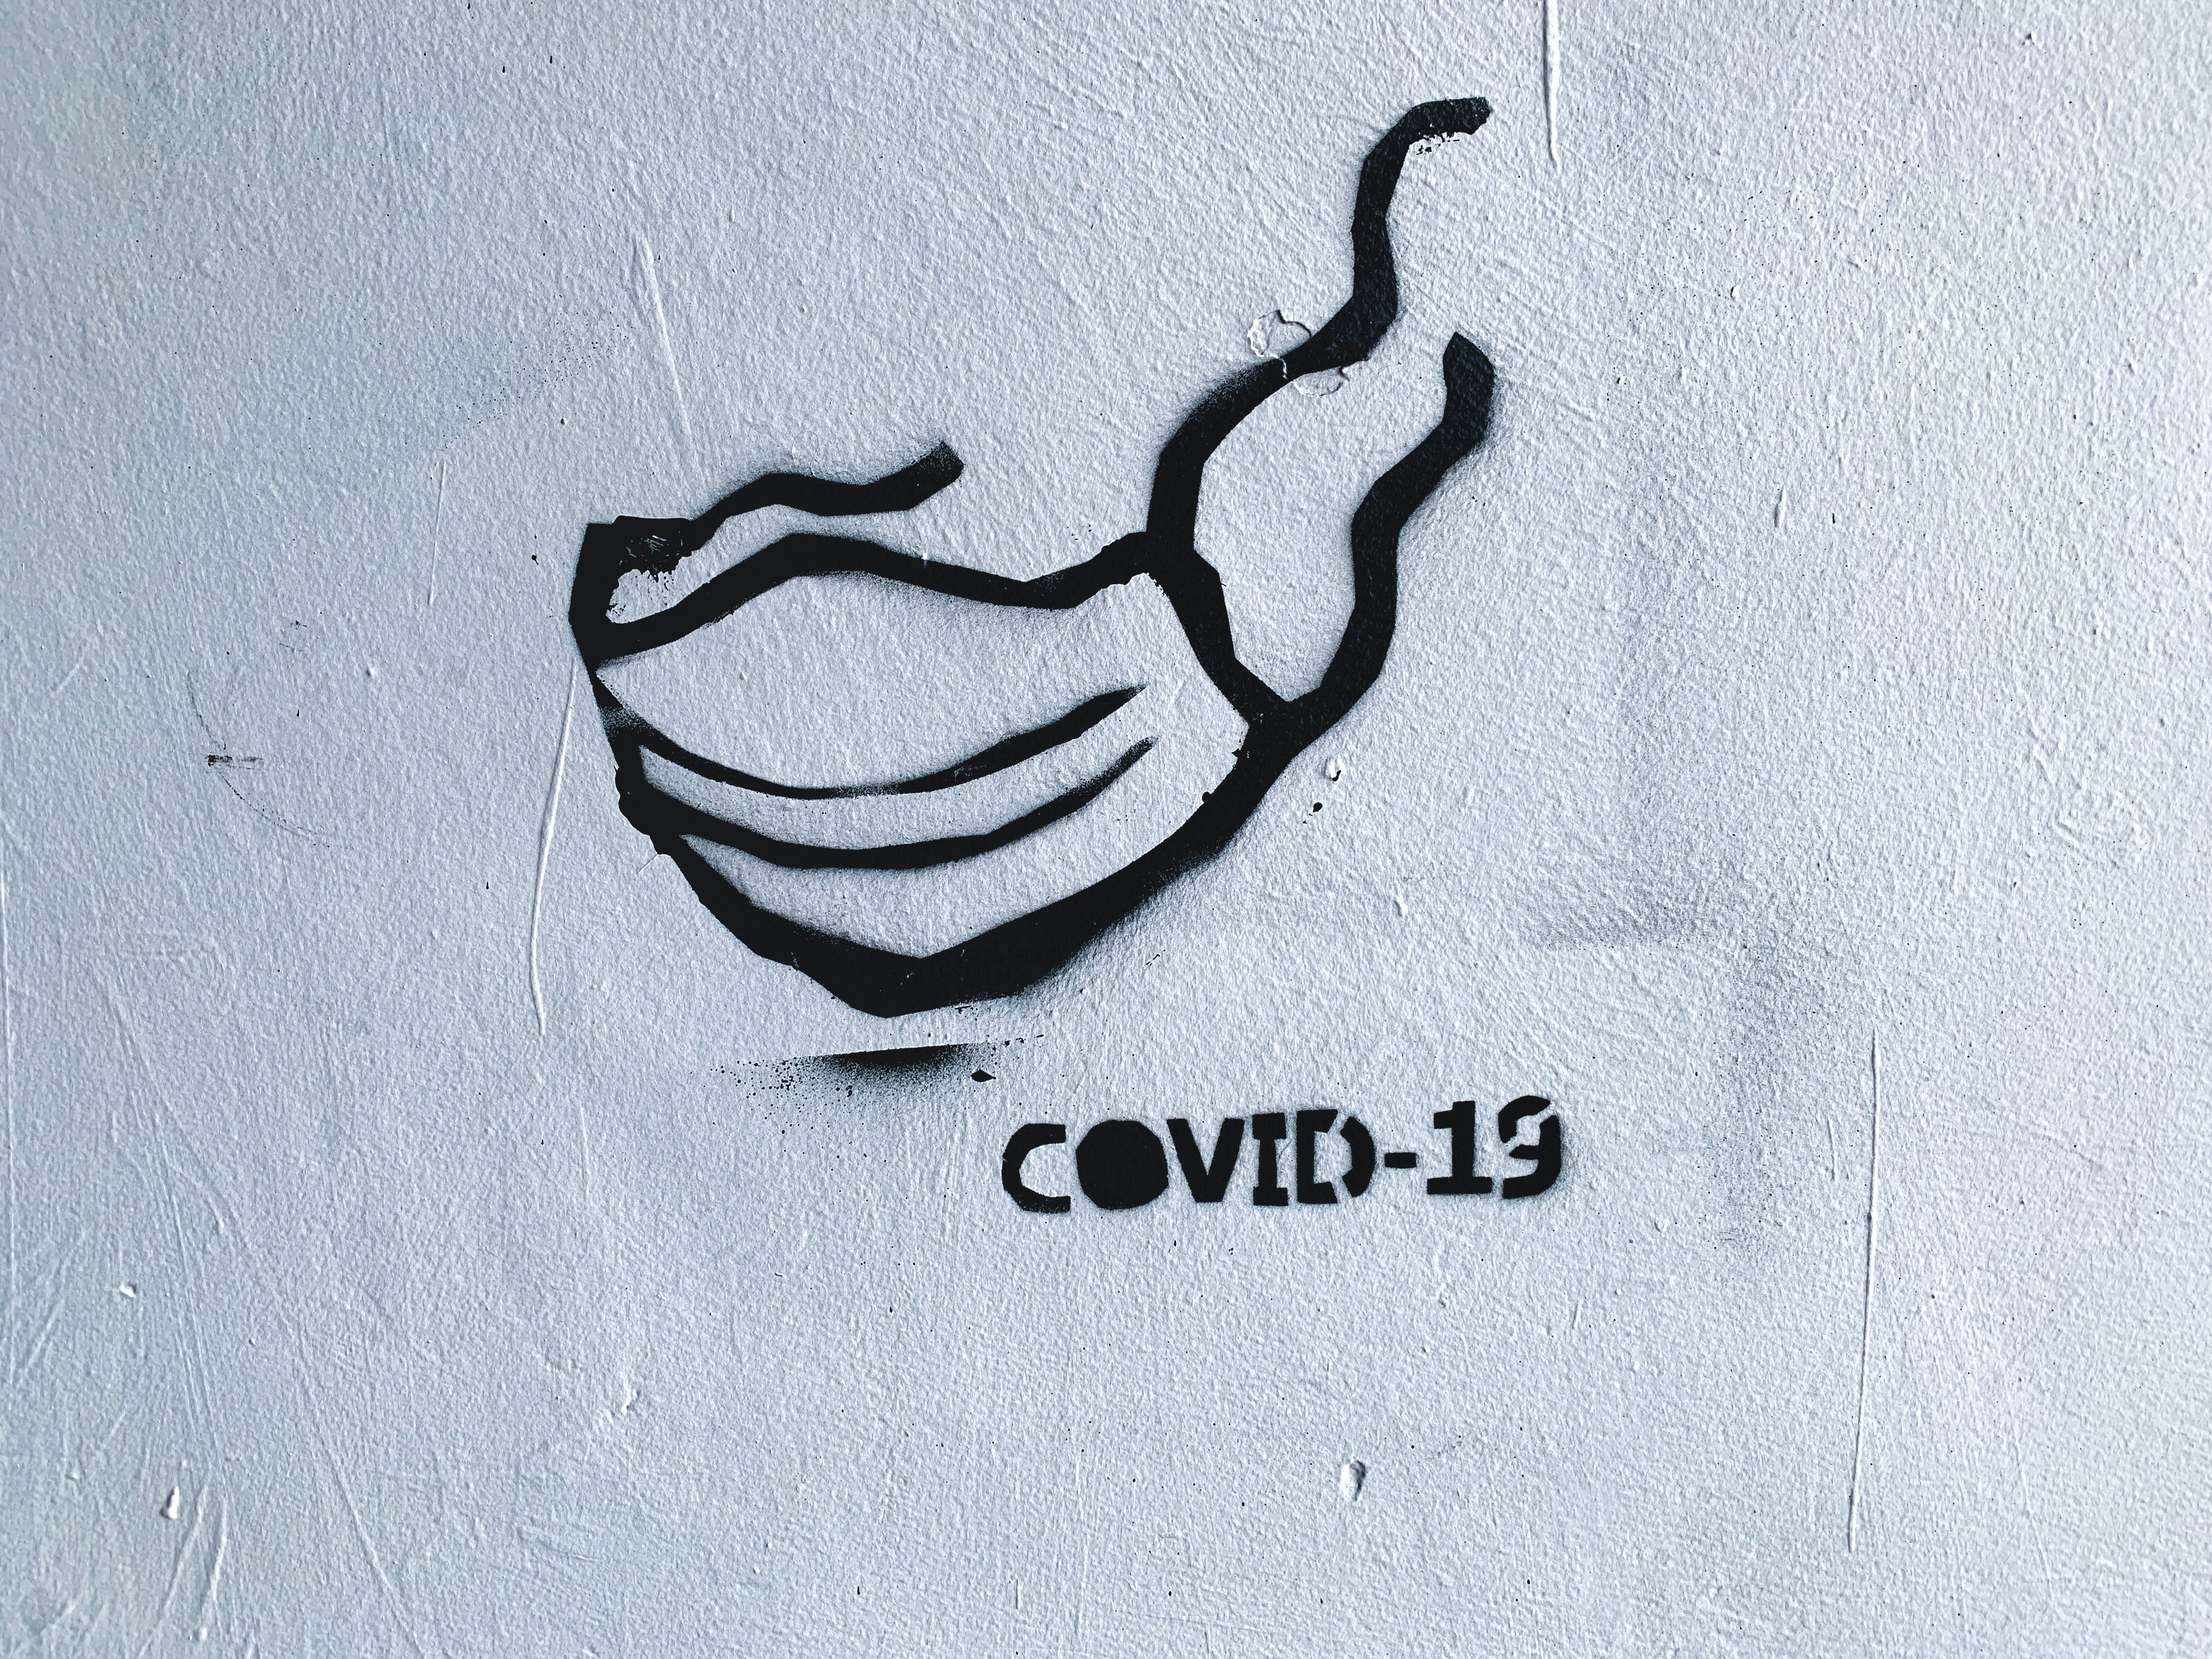 Street art of a black face mask with "COVID-19" writing